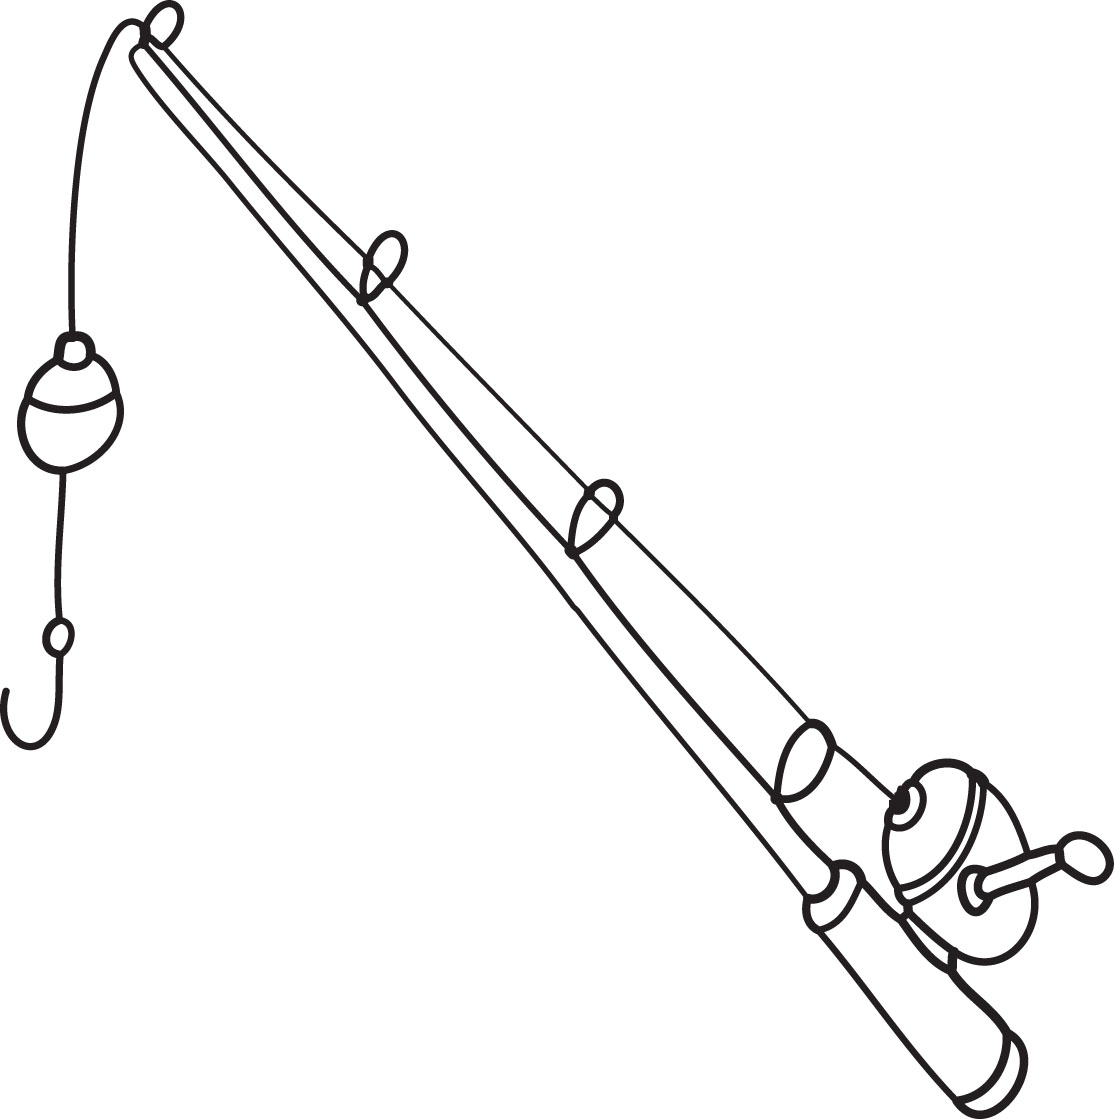 Fishing Pole Clipart - Free Clipart Images